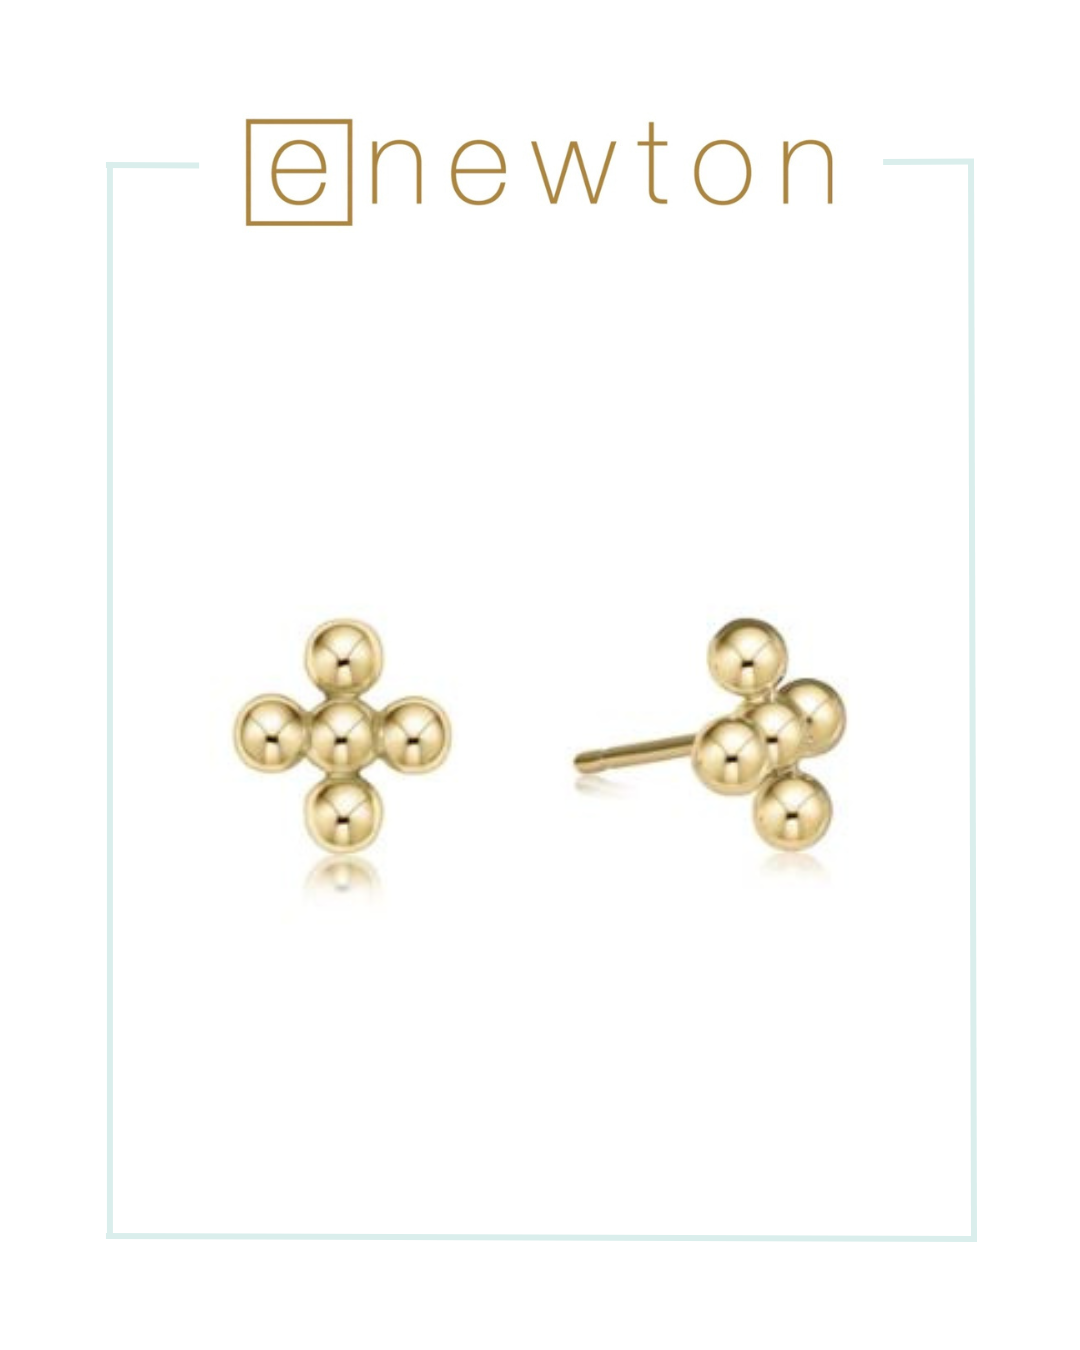 E Newton Classic Beaded Signature Cross 4mm Bead Stud - Gold-Earrings-ENEWTON-The Village Shoppe, Women’s Fashion Boutique, Shop Online and In Store - Located in Muscle Shoals, AL.